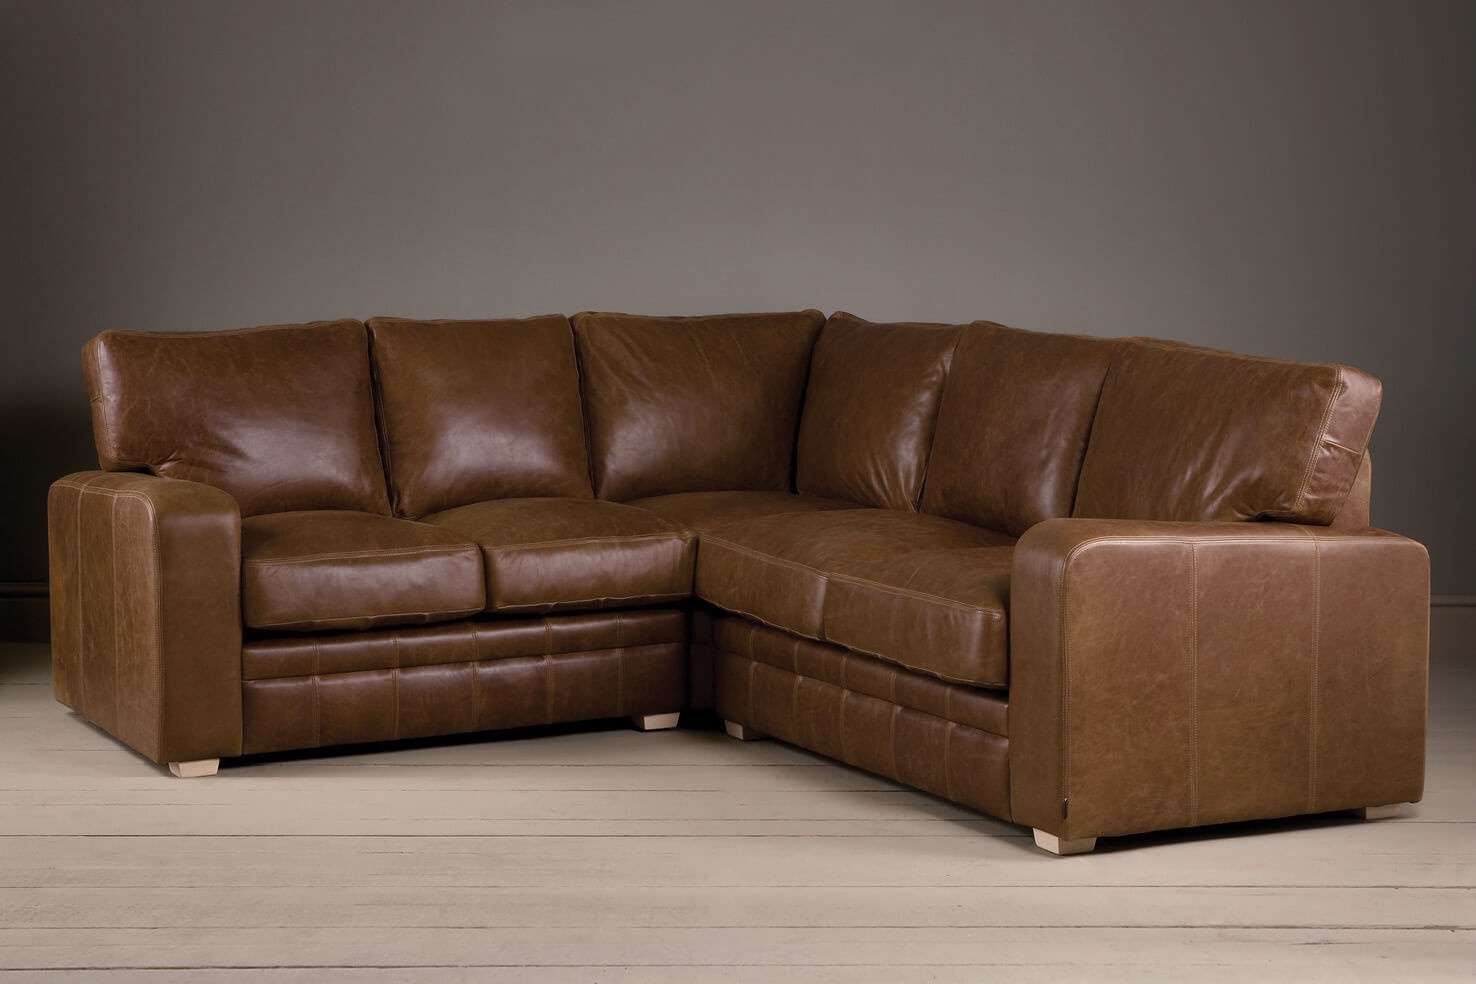 Leather corner sofa-a style statement in your home